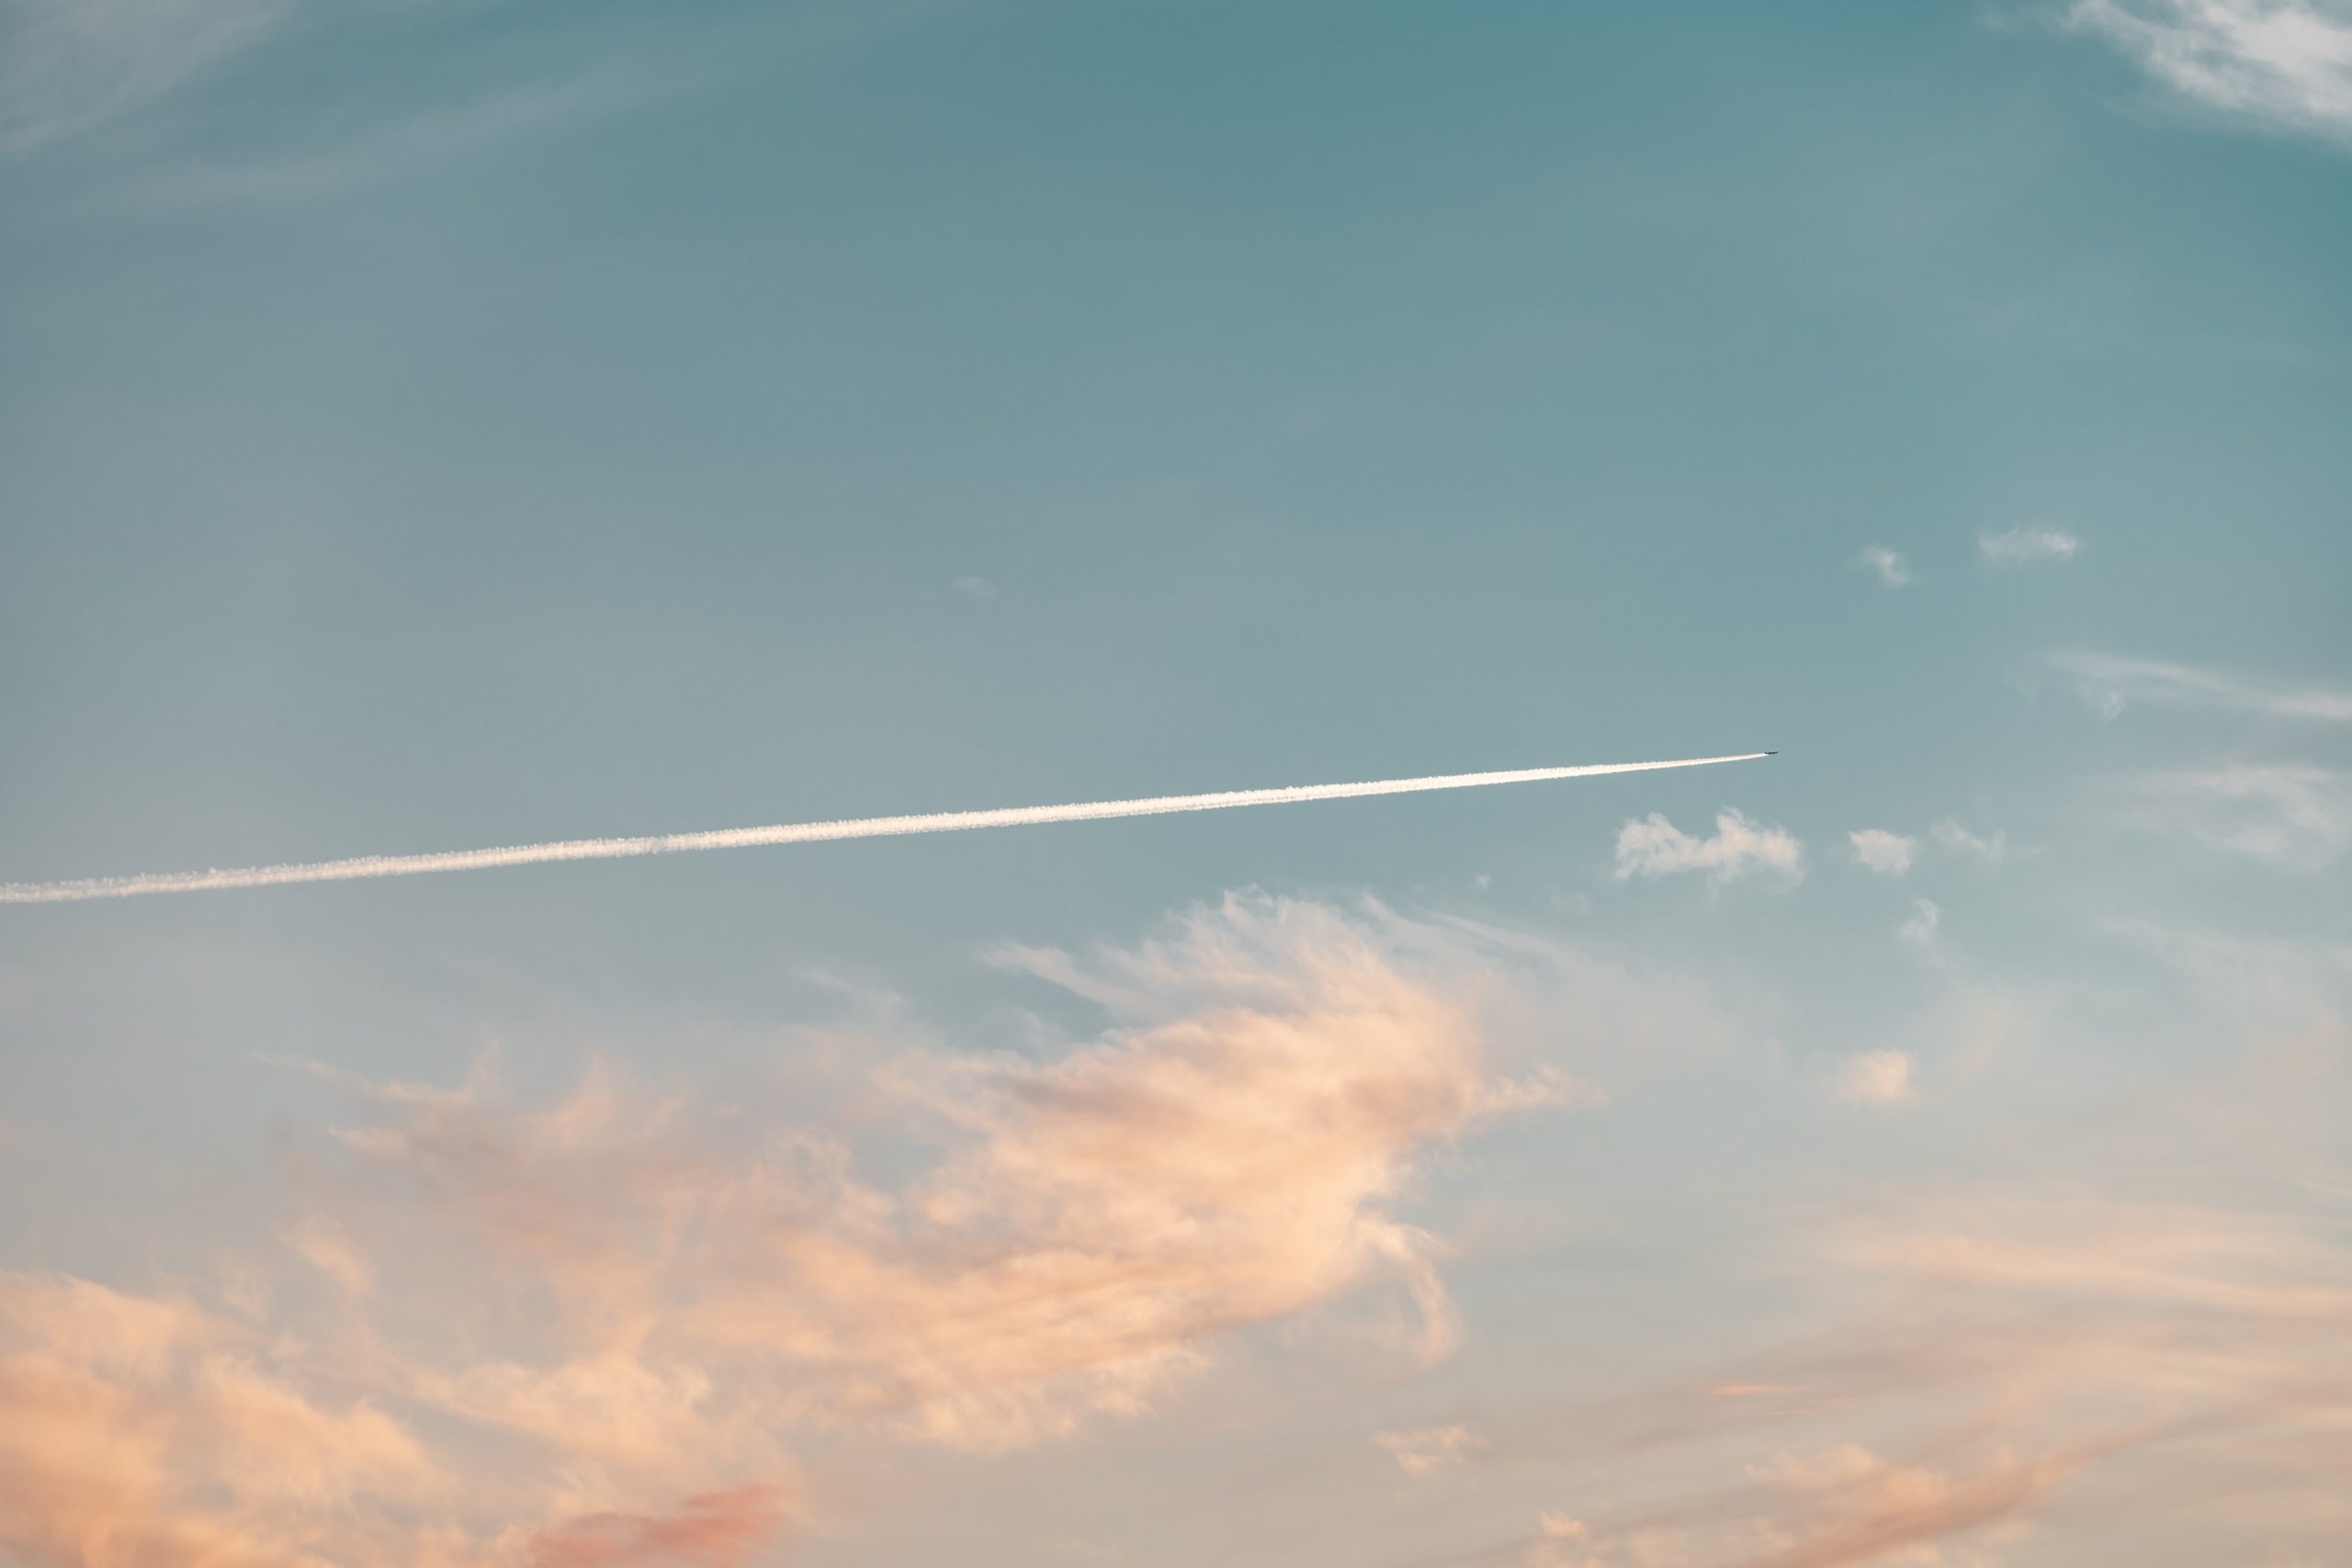 Plane flying in the sky at sunset